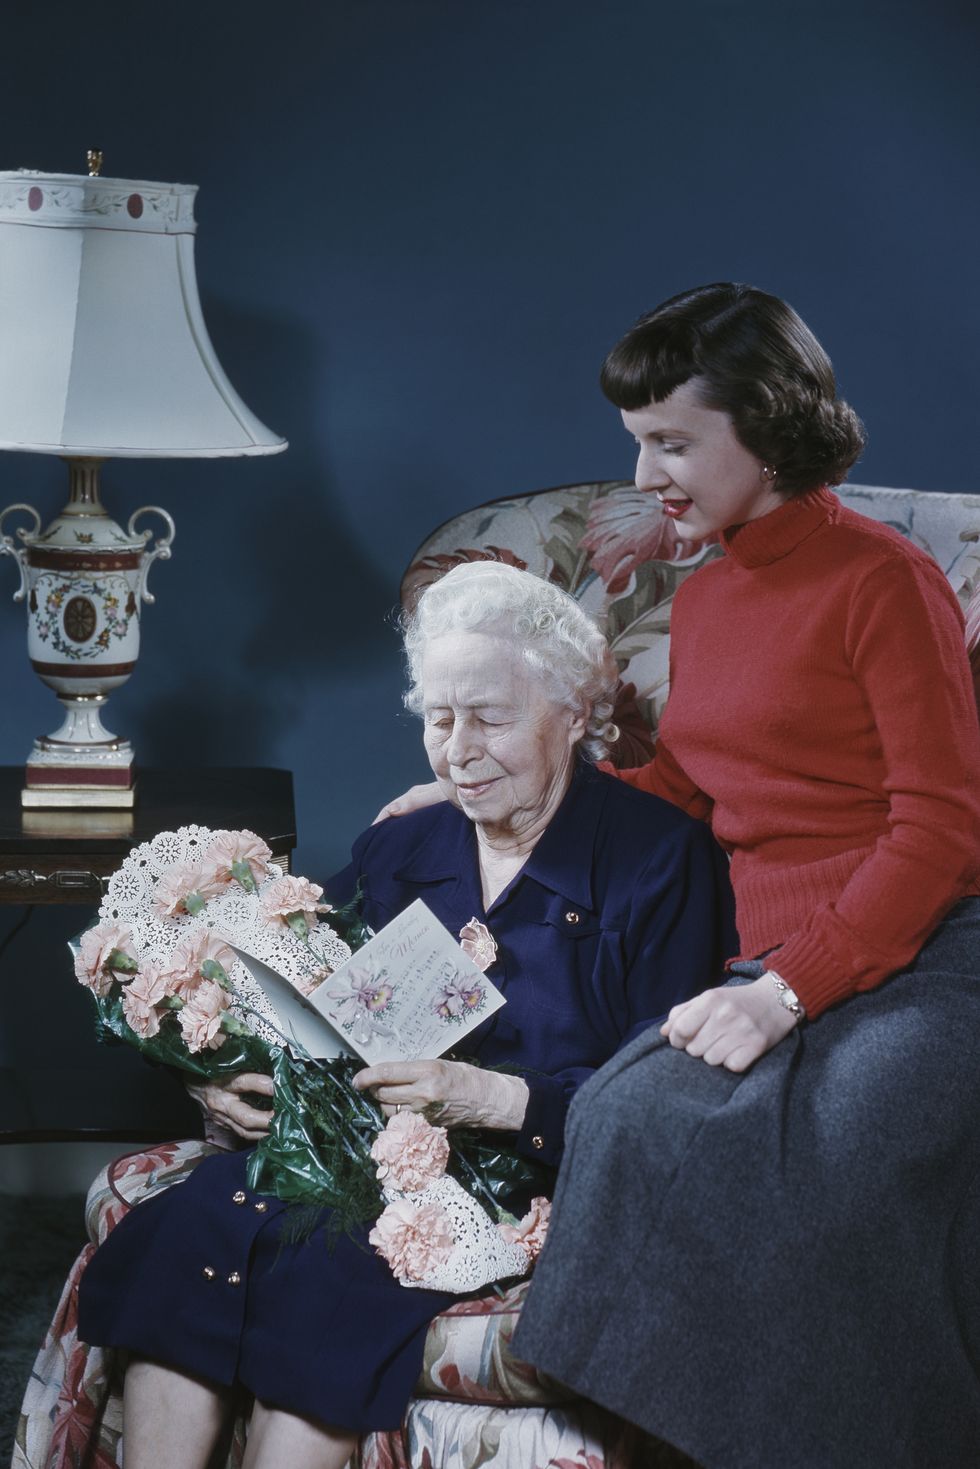 19 Mother's Day Facts You Don't Know - History of Mother's Day Explained